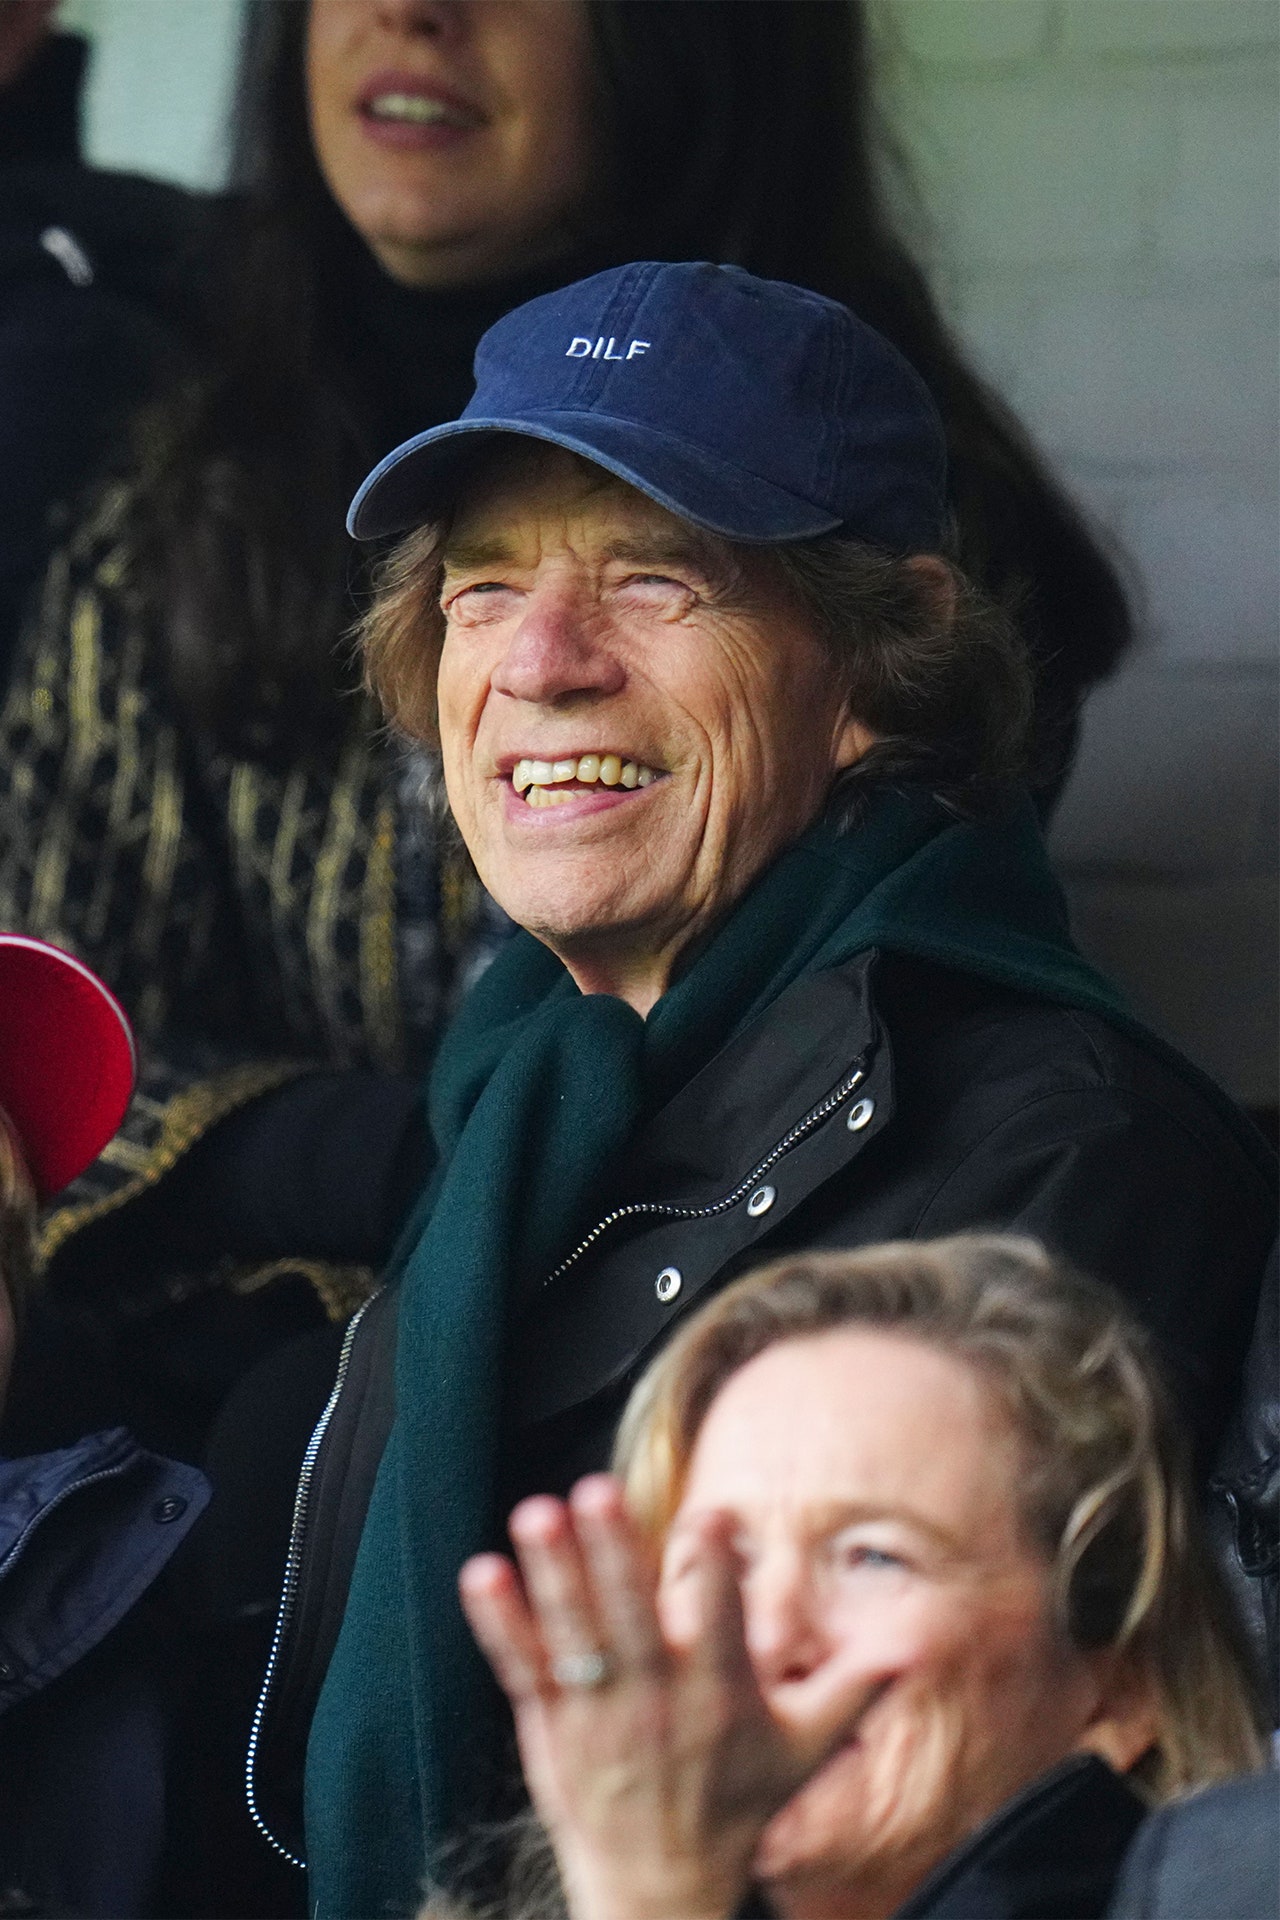 the-dilf-is-back,-says-mick-jagger-(but-how-many-acronyms-do-you-know?)